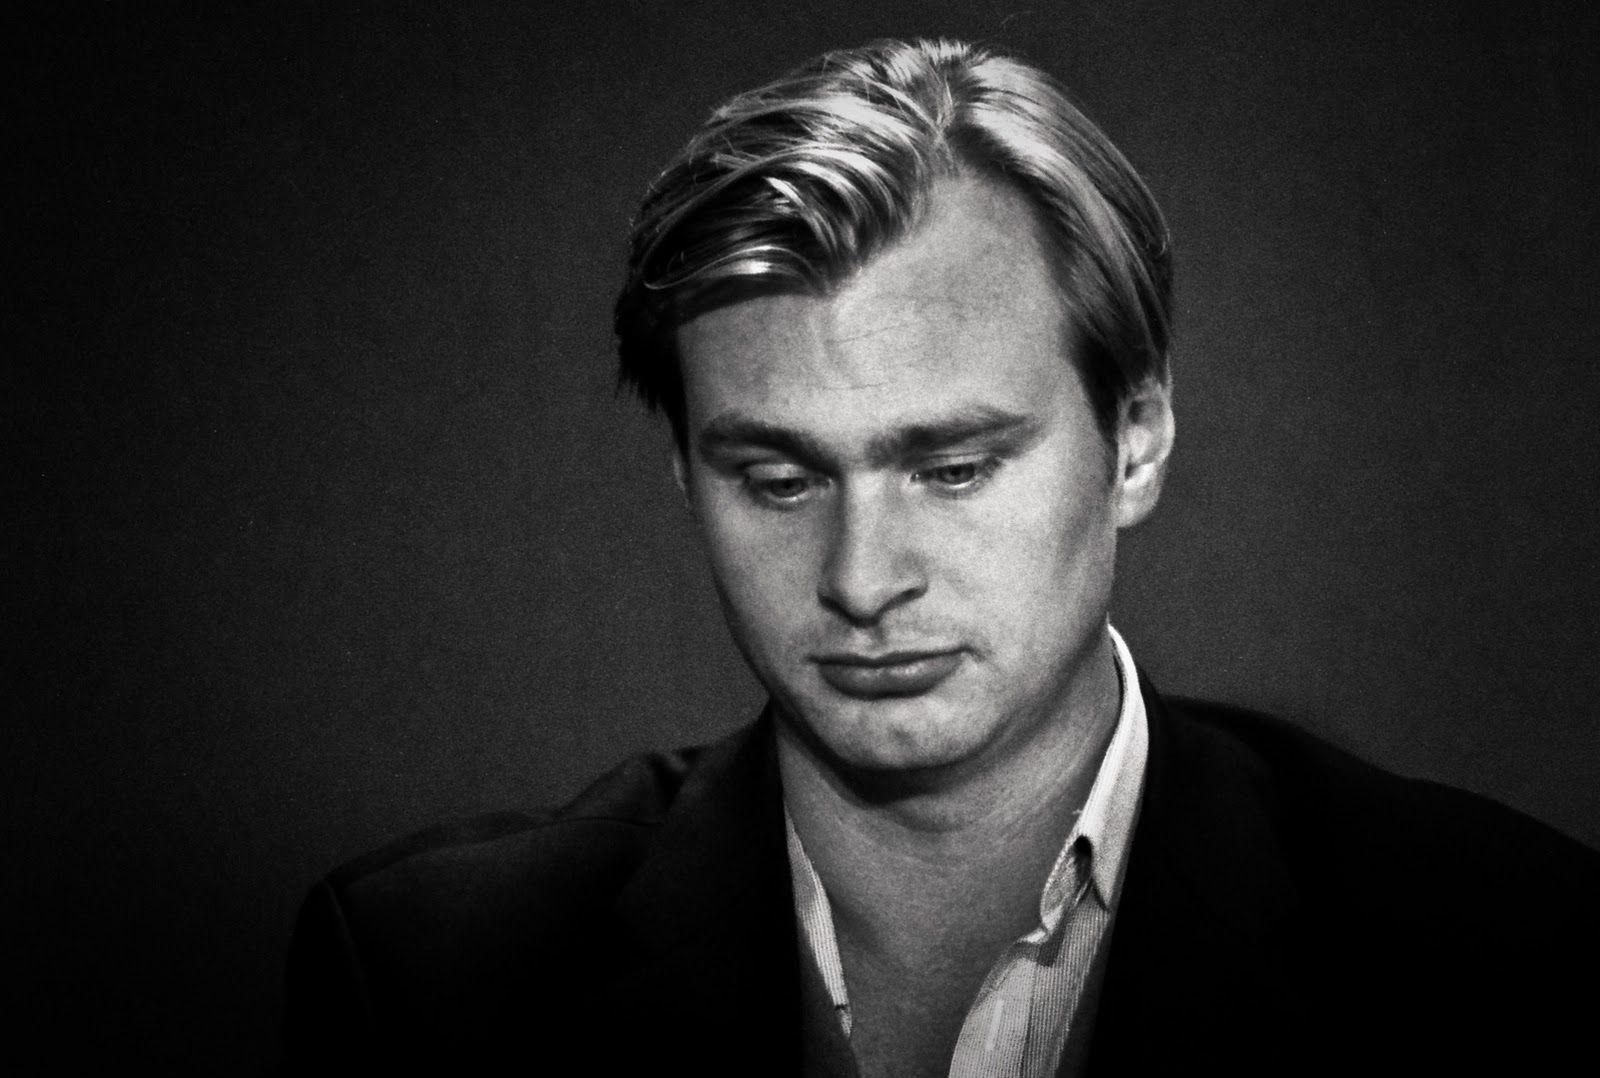 Christopher Nolan Photography HD Image 3 HD Wallpaper. Places